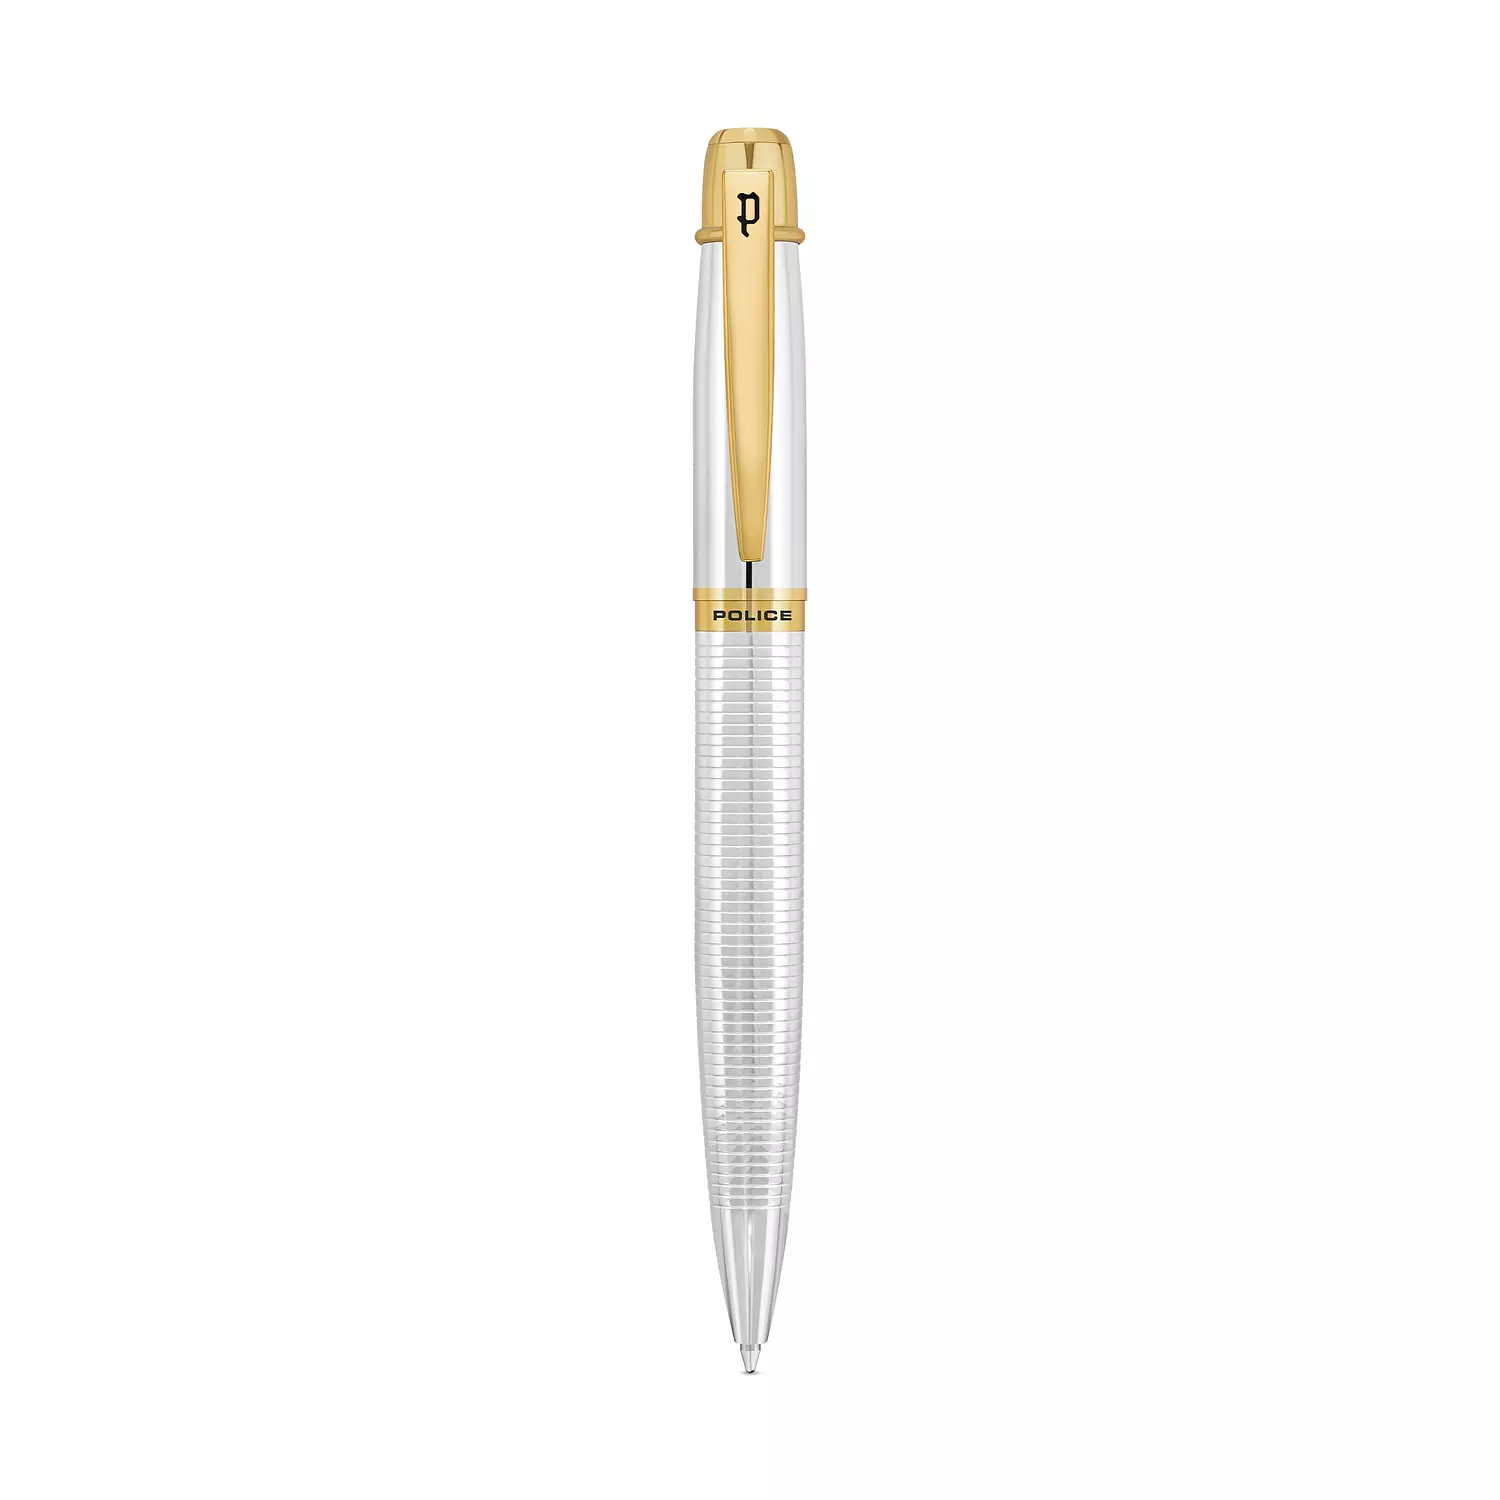 Police Pen For Men- Silver and Gold Color -Ball Point - PERGR0001404 hover image